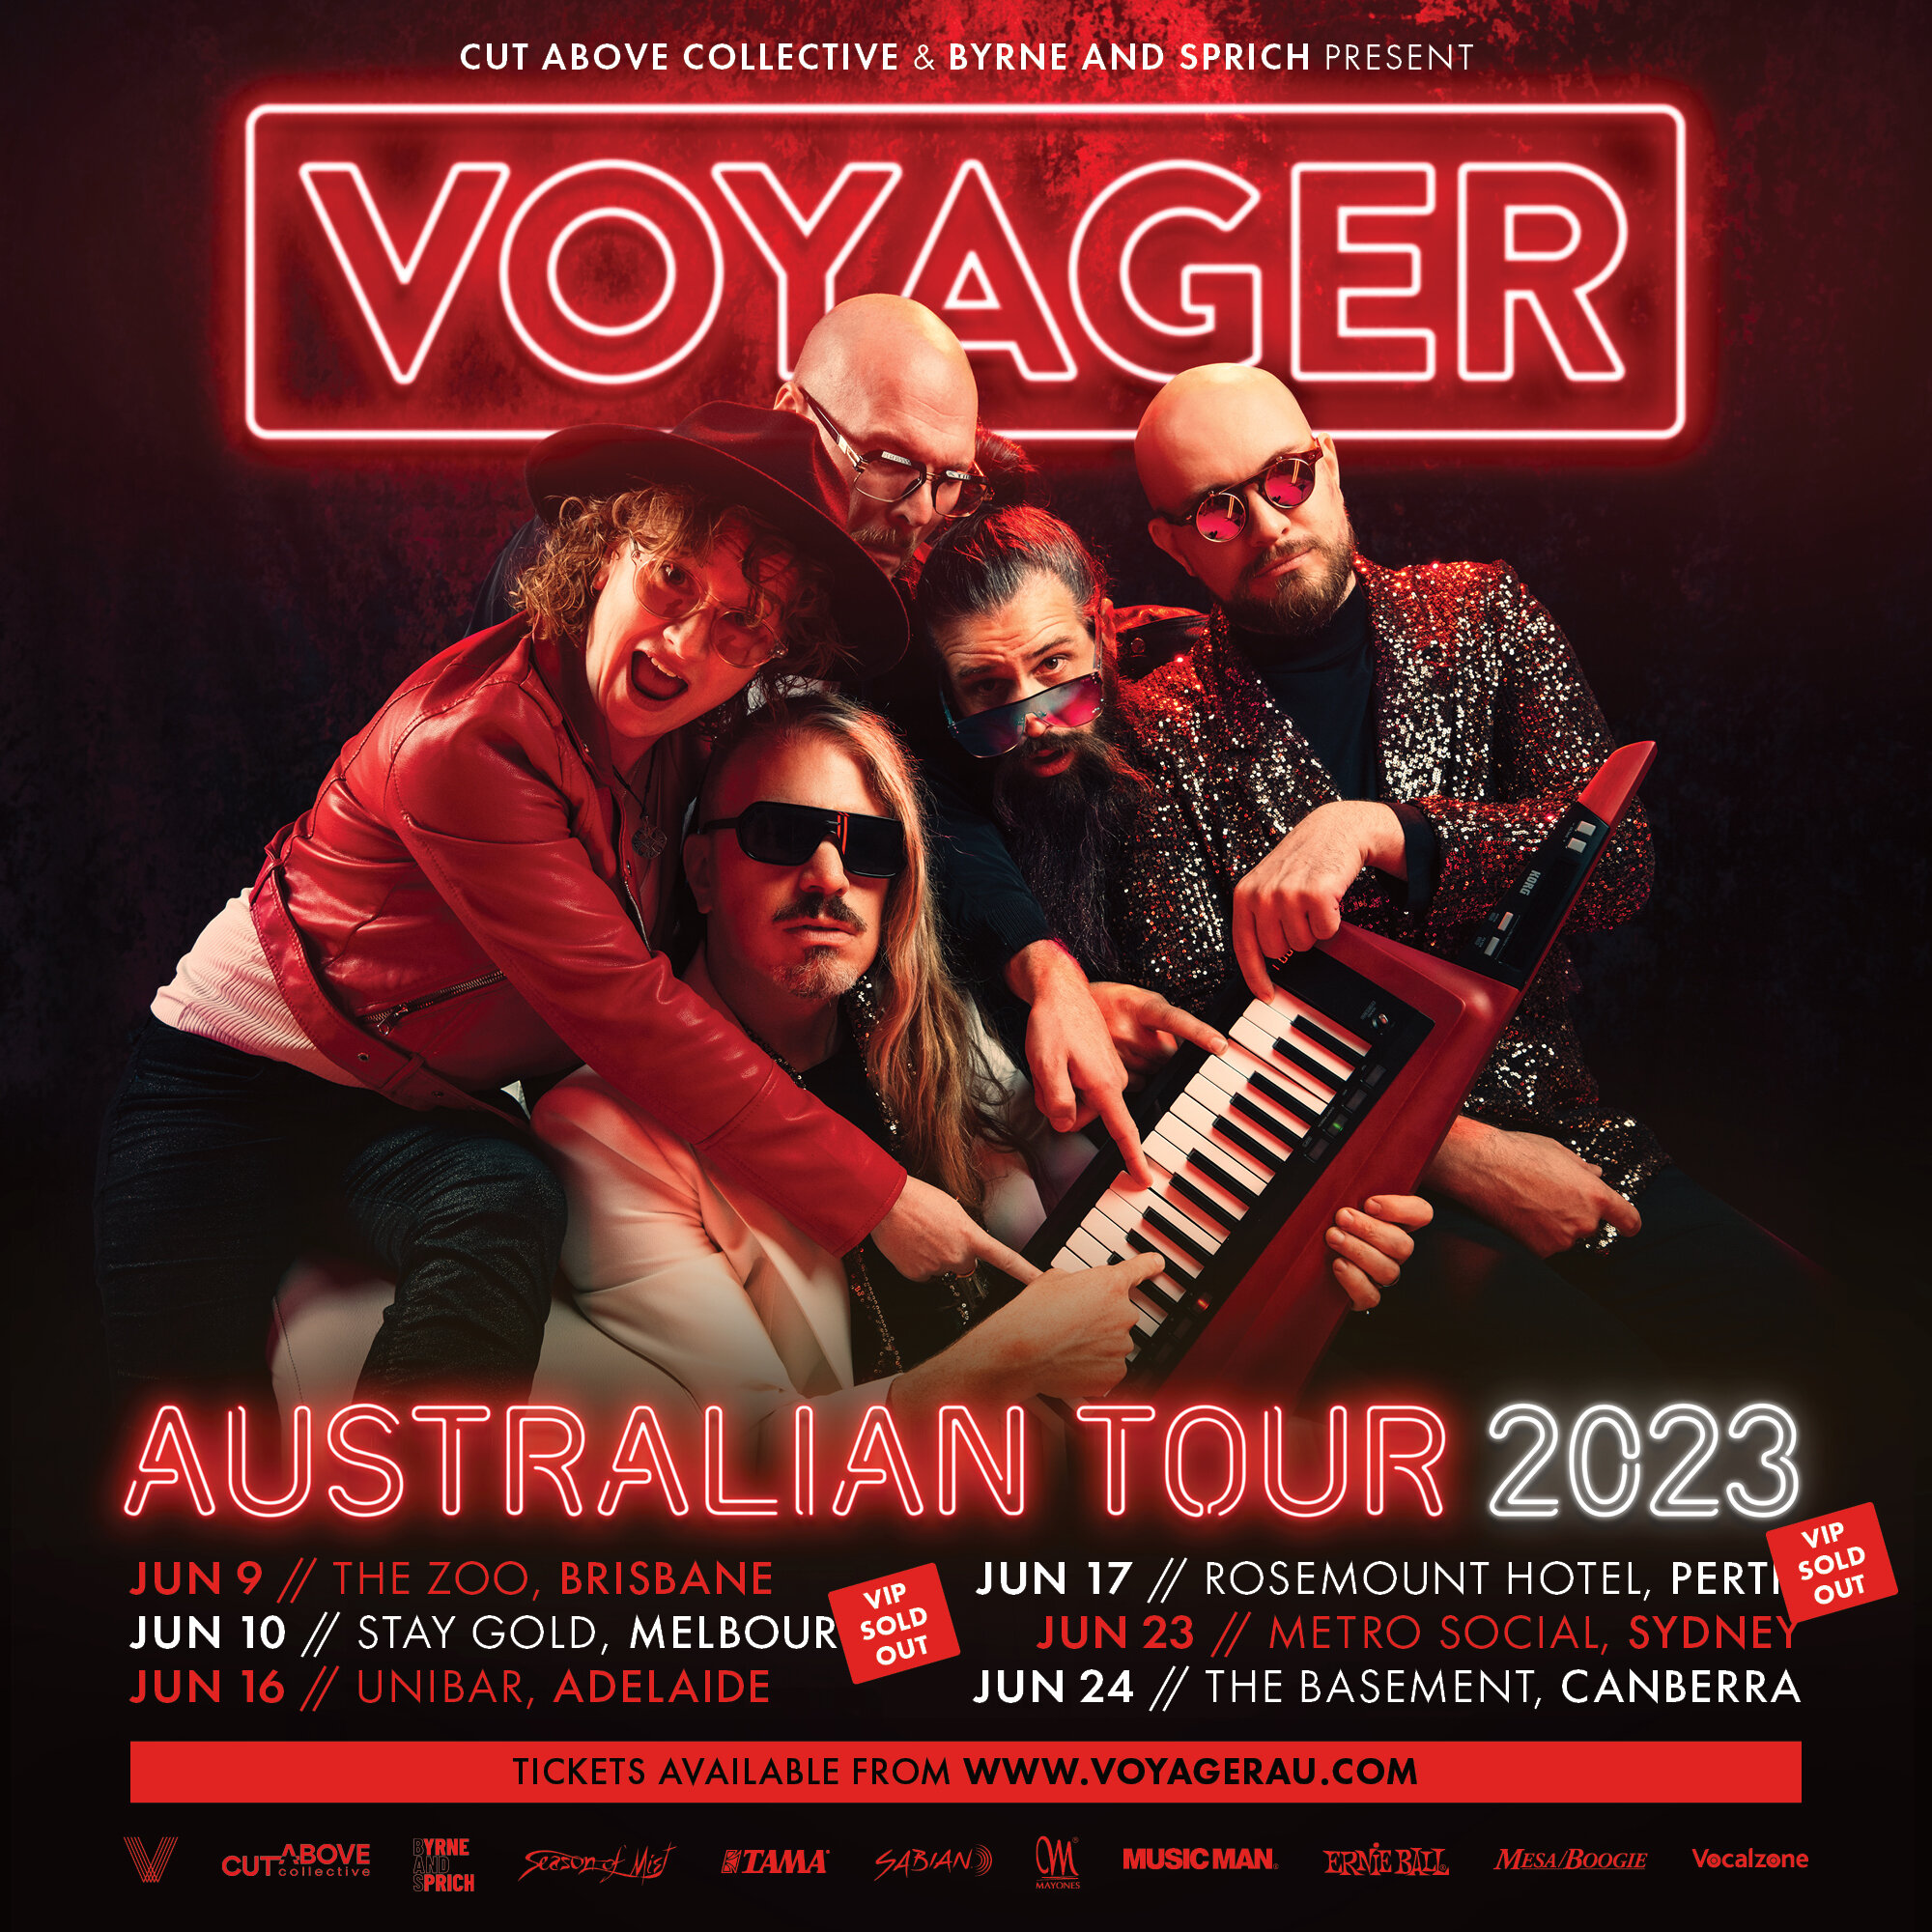 ⚠️ TICKET WARNING AUSTRALIA! Next month we play a headline tour to celebrate our return to our beautiful country, and tickets are moving at a very fast rate. If you don't want to miss out we recommend purchasing them today!

🎫 (VIP) Tickets via link